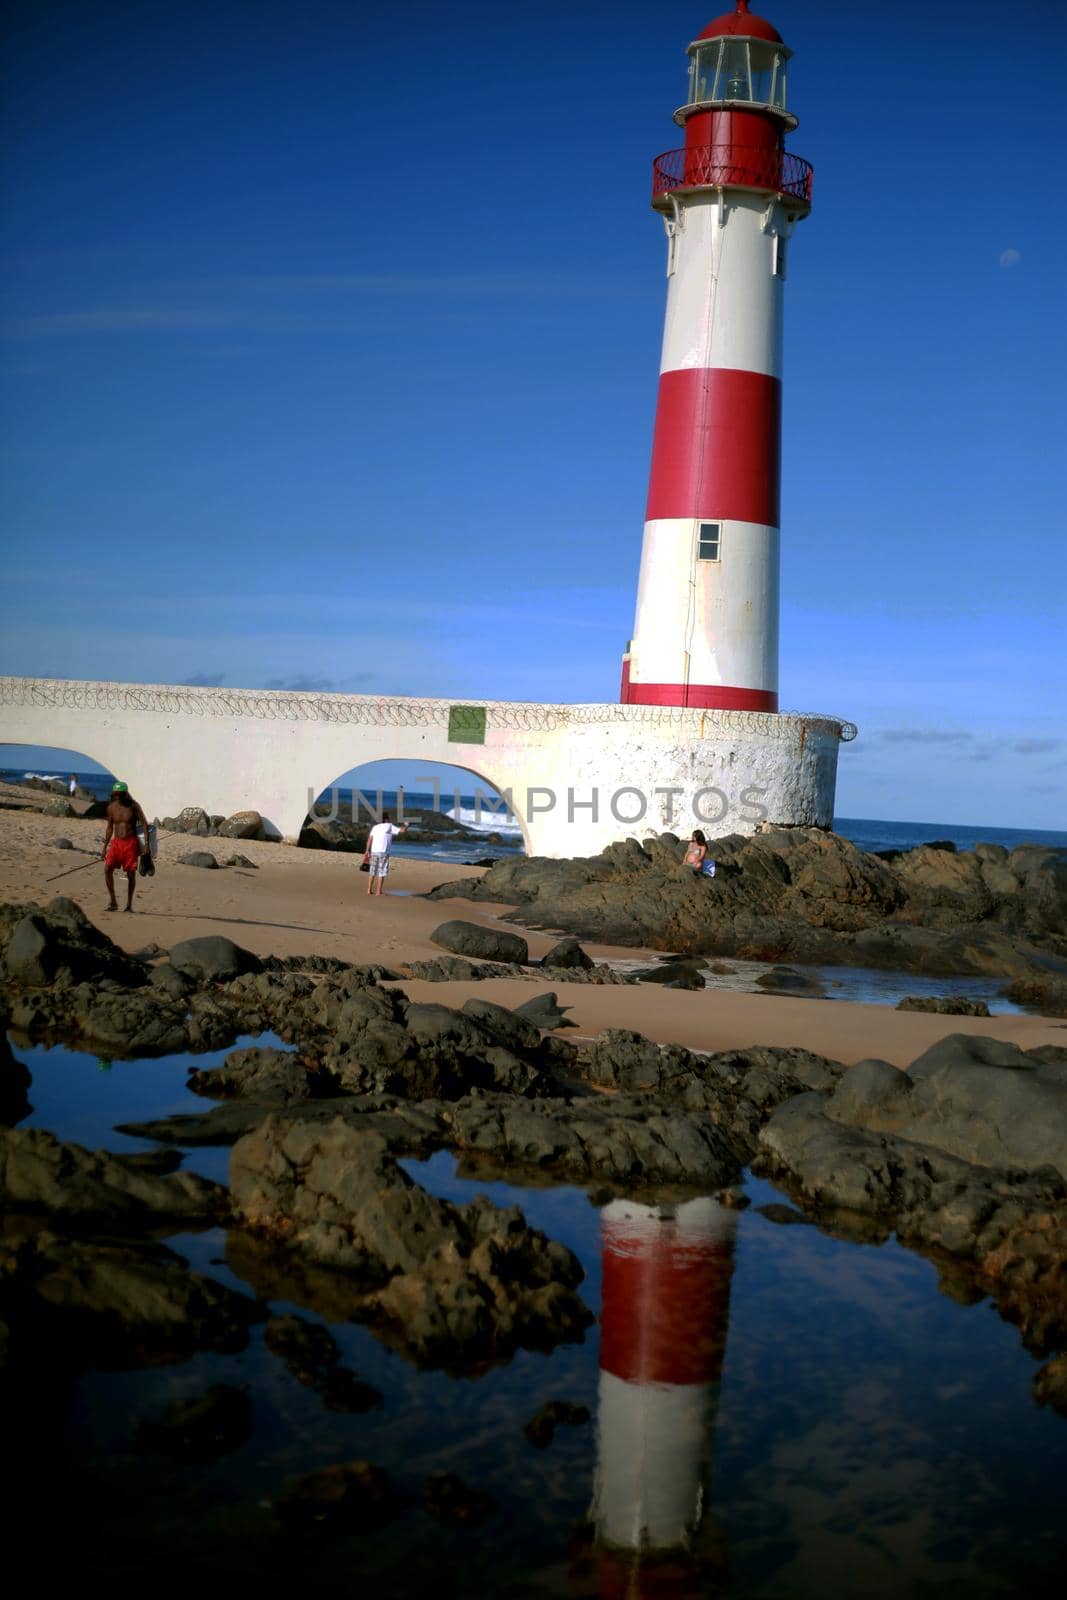 salvador, bahia / brazil - may 29, 2015: View of the Itapua Lighthouse in Salvador.